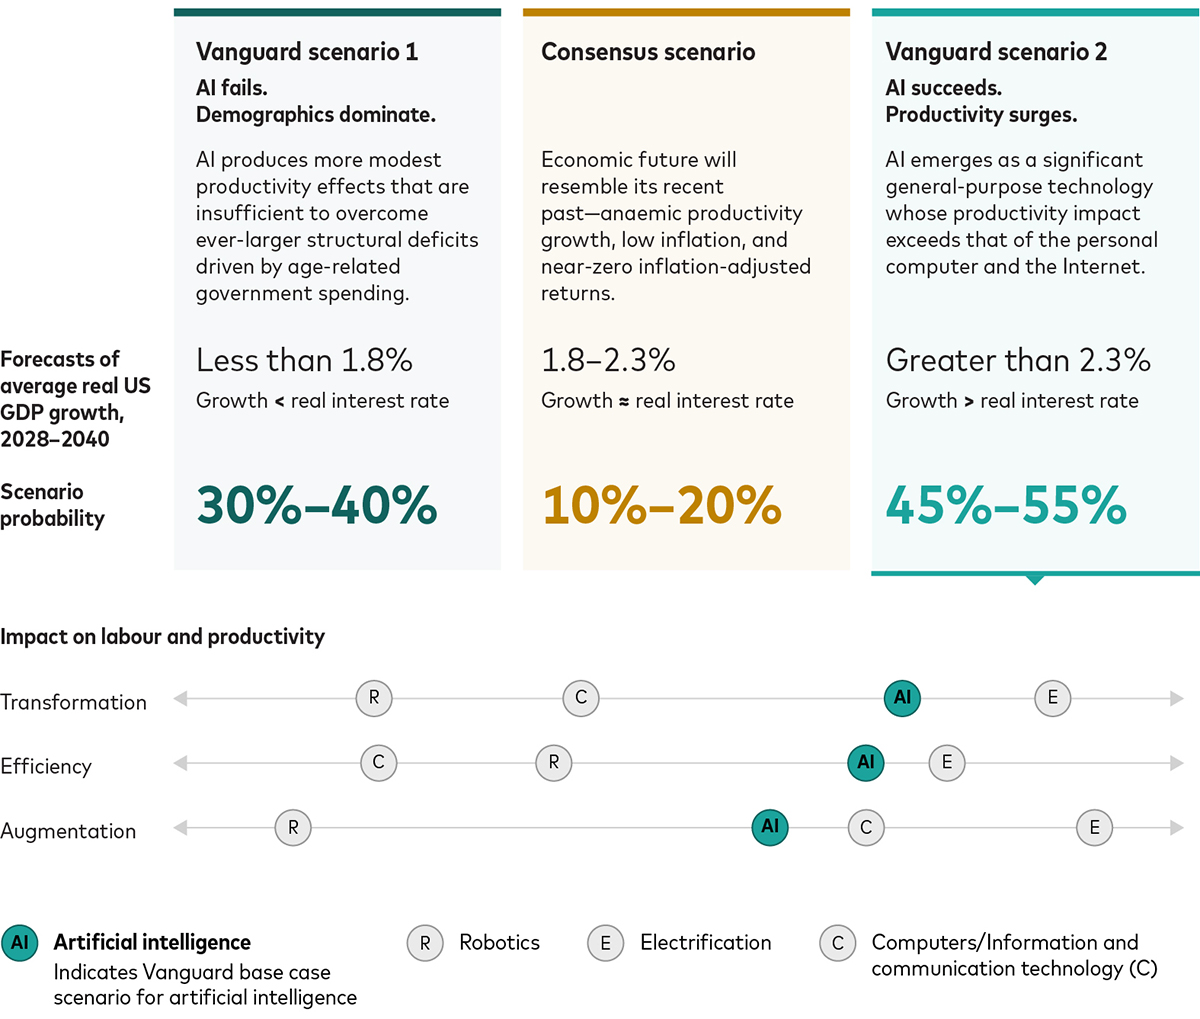 A graphic describes three scenarios for long-run, real U.S. GDP growth and their associated probabilities. Vanguard scenario 1 is that AI fails. Demographics dominate. Economic growth is less than 1.8%. It falls short of the real interest rate. The probability of this scenario is 30% to 40%. The consensus scenario is for economic growth between 1.8% and 2.3%. Growth roughly equals the real interest rate. The probability of this scenario is 10% to 20%. Vanguard scenario 2 is that AI succeeds. Productivity surges. Economic growth is greater than 2.3%. Economic growth is greater than the real interest rate. The probability of this scenario is 45% to 55%.  Beneath the three economic scenarios, a chart compares Vanguard’s base case scenario for the impact of Artificial Intelligence relative to three other technologies, Robotics, Computers/(ICT), and electrification. We make the comparison along three dimensions: transformation, efficiency, and augmentation.  Our base case is that AI will be more transformative than robotics and computers, less transformative than electrification. AI will lead to greater efficiency than robotics and computers, less than electrification. AI will do more to augment worker productivity than robotics but less than computers and electrification.